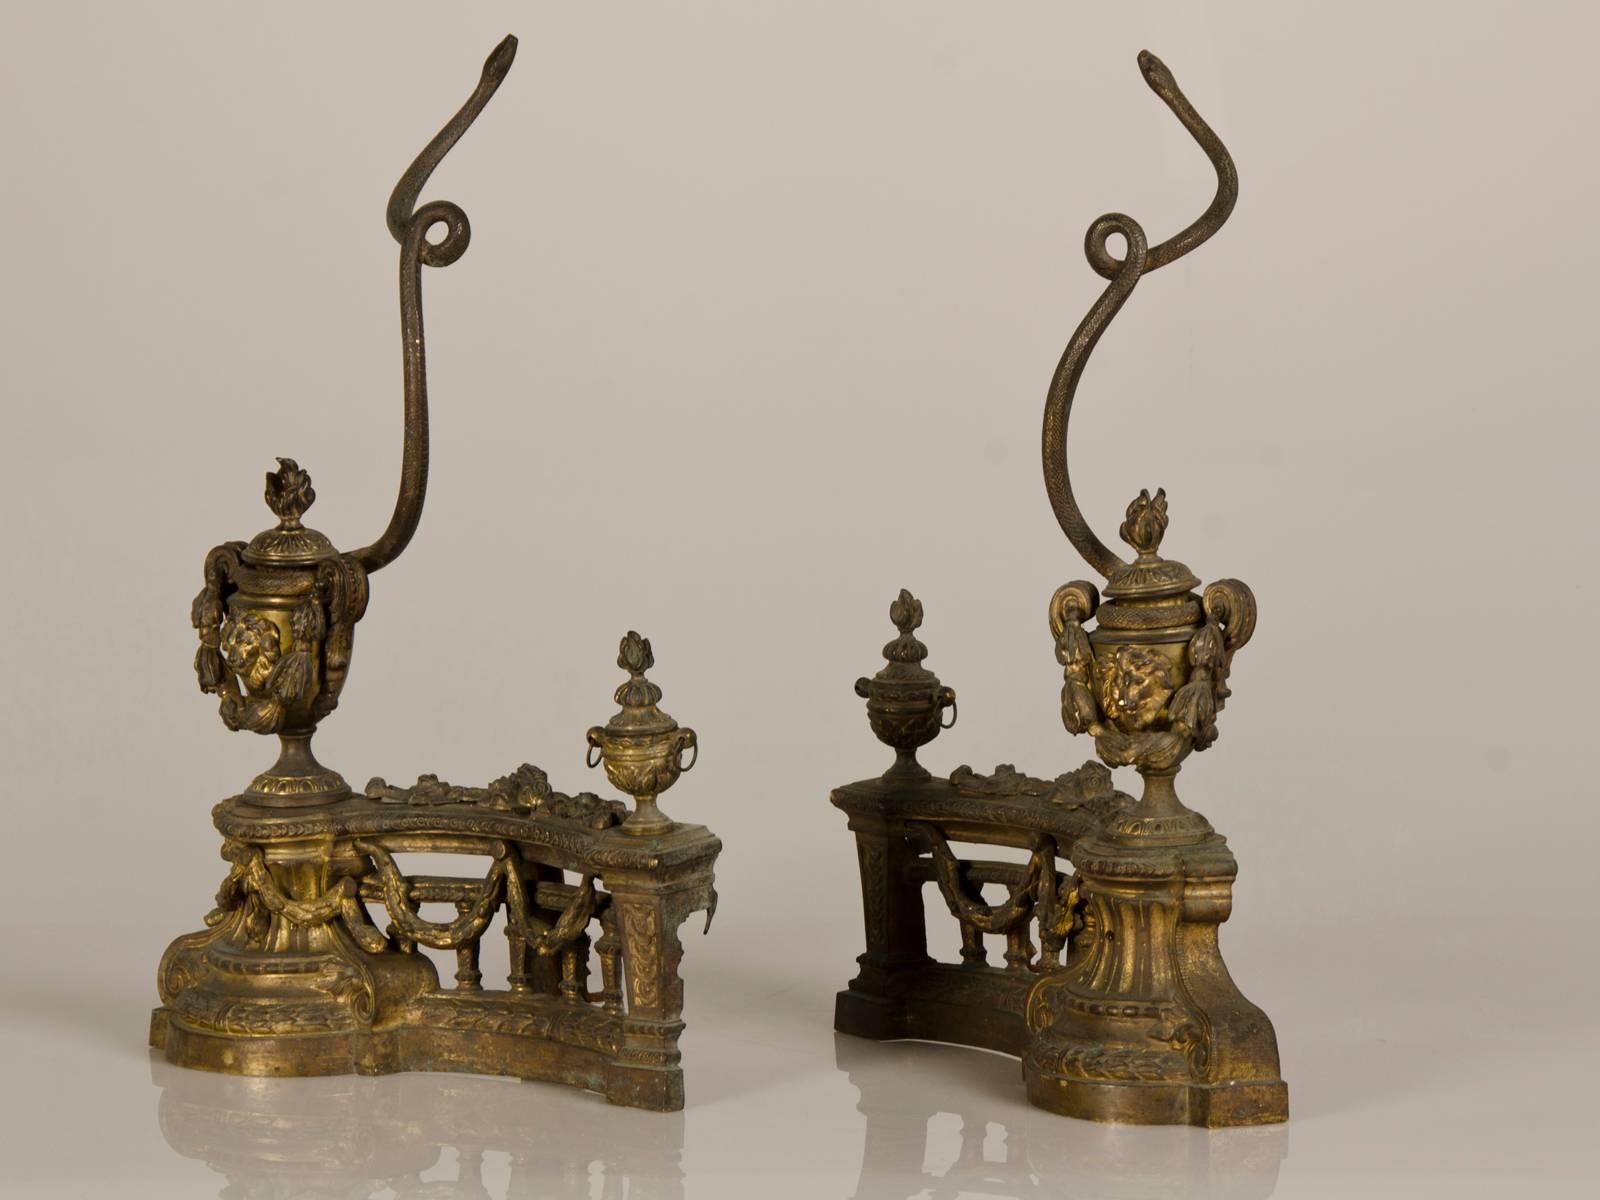 A pair of antique French Louis XVI style aged bronze doré chenets (in English firedog or andiron) from Belle Époque period France circa 1890 featuring entwined serpents set within an architectural base. These unique fire place accessories are a